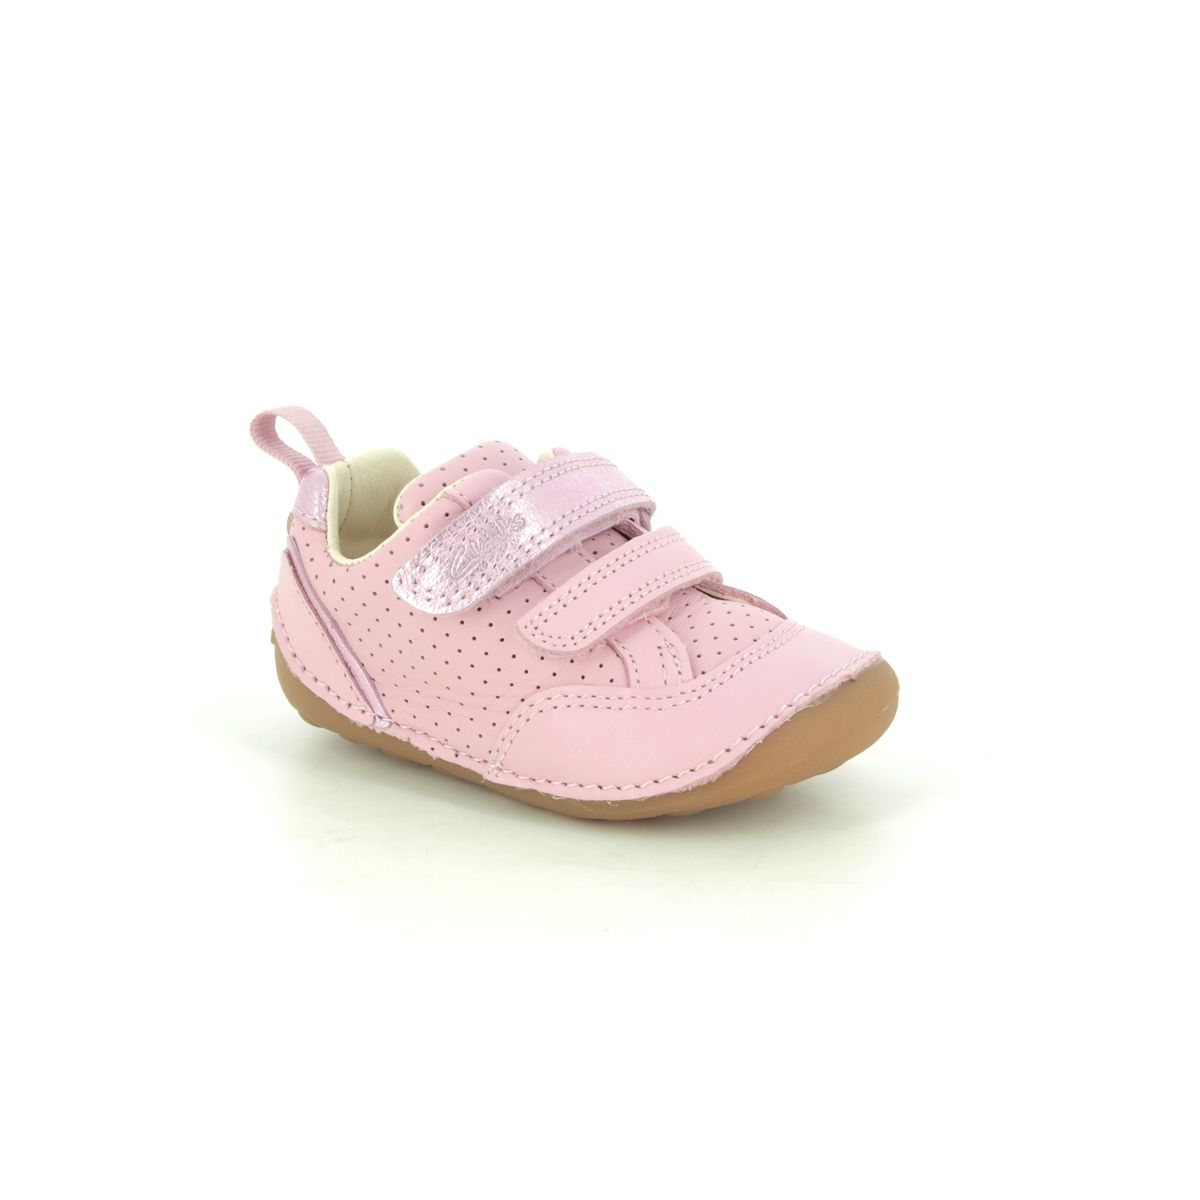 Clarks Tiny Sky T Pink Leather Kids Girls First And Baby Shoes 576287G In Size 5 In Plain Pink Leather G Width Fitting For kids